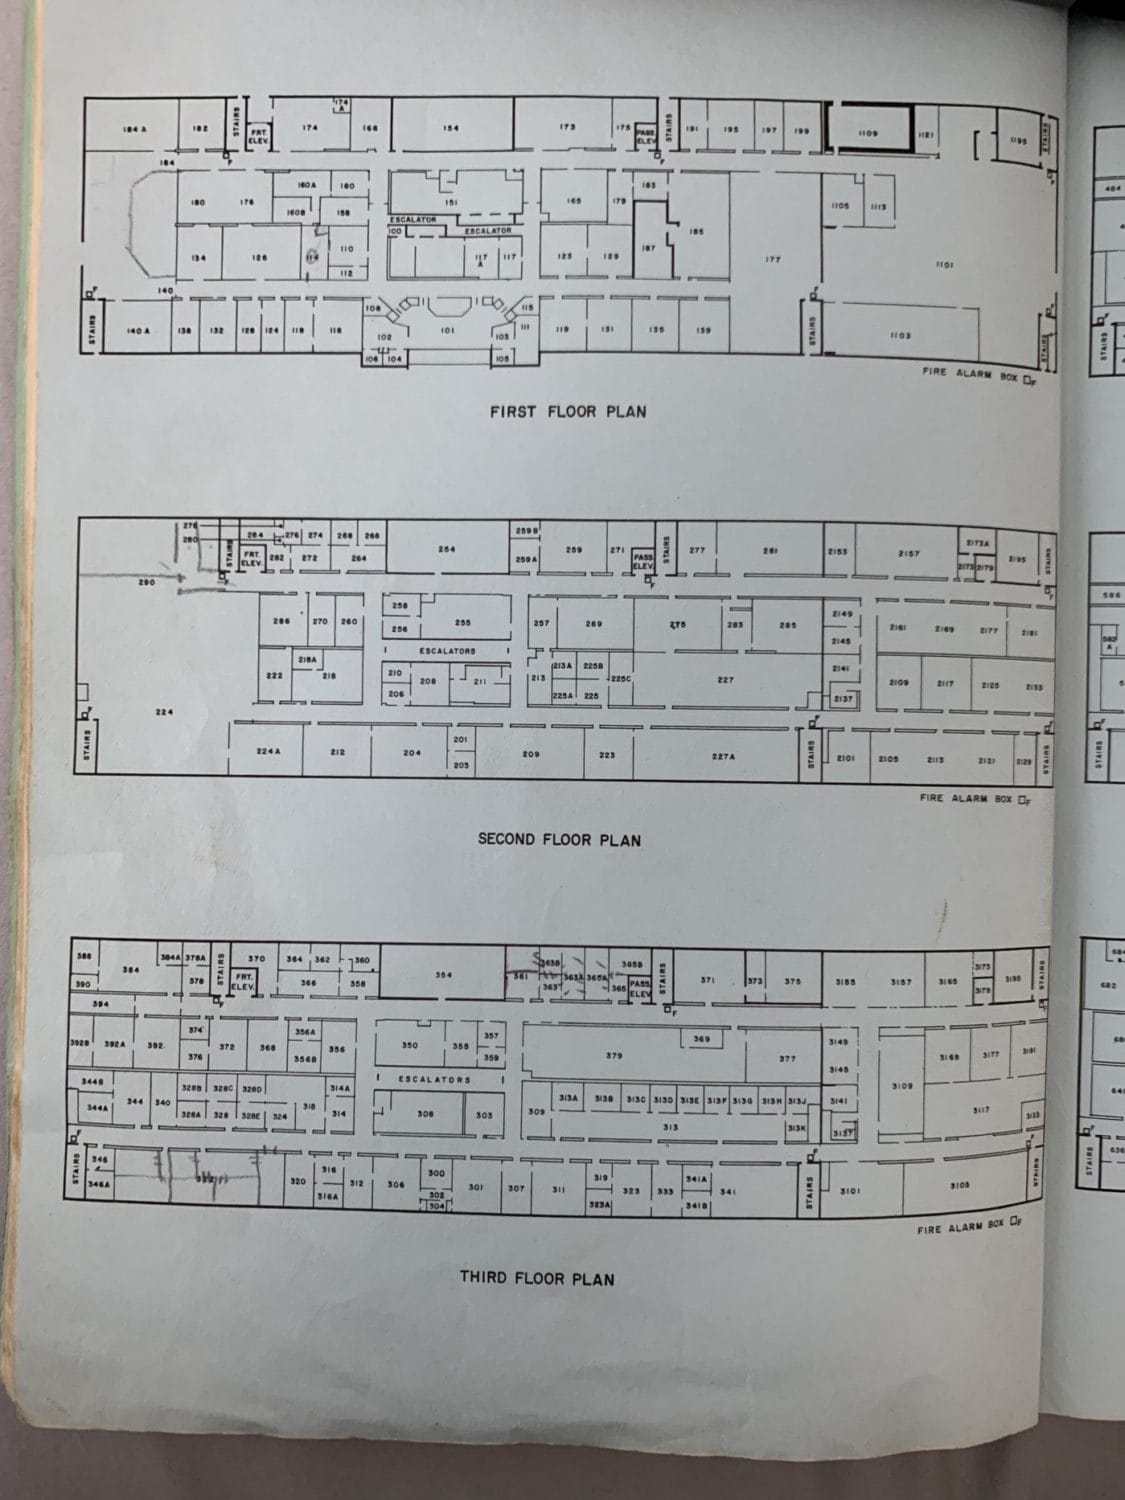 Hunters-Point-Shipyard-Bldg-815-windowless-former-Naval-Radiological-Defense-Laboratory-NRDL-headquarters-floor-plans-entrusted-to-Ernest-Hamilton-Tascoe-Jr., The heritage of our fathers, Local News & Views 